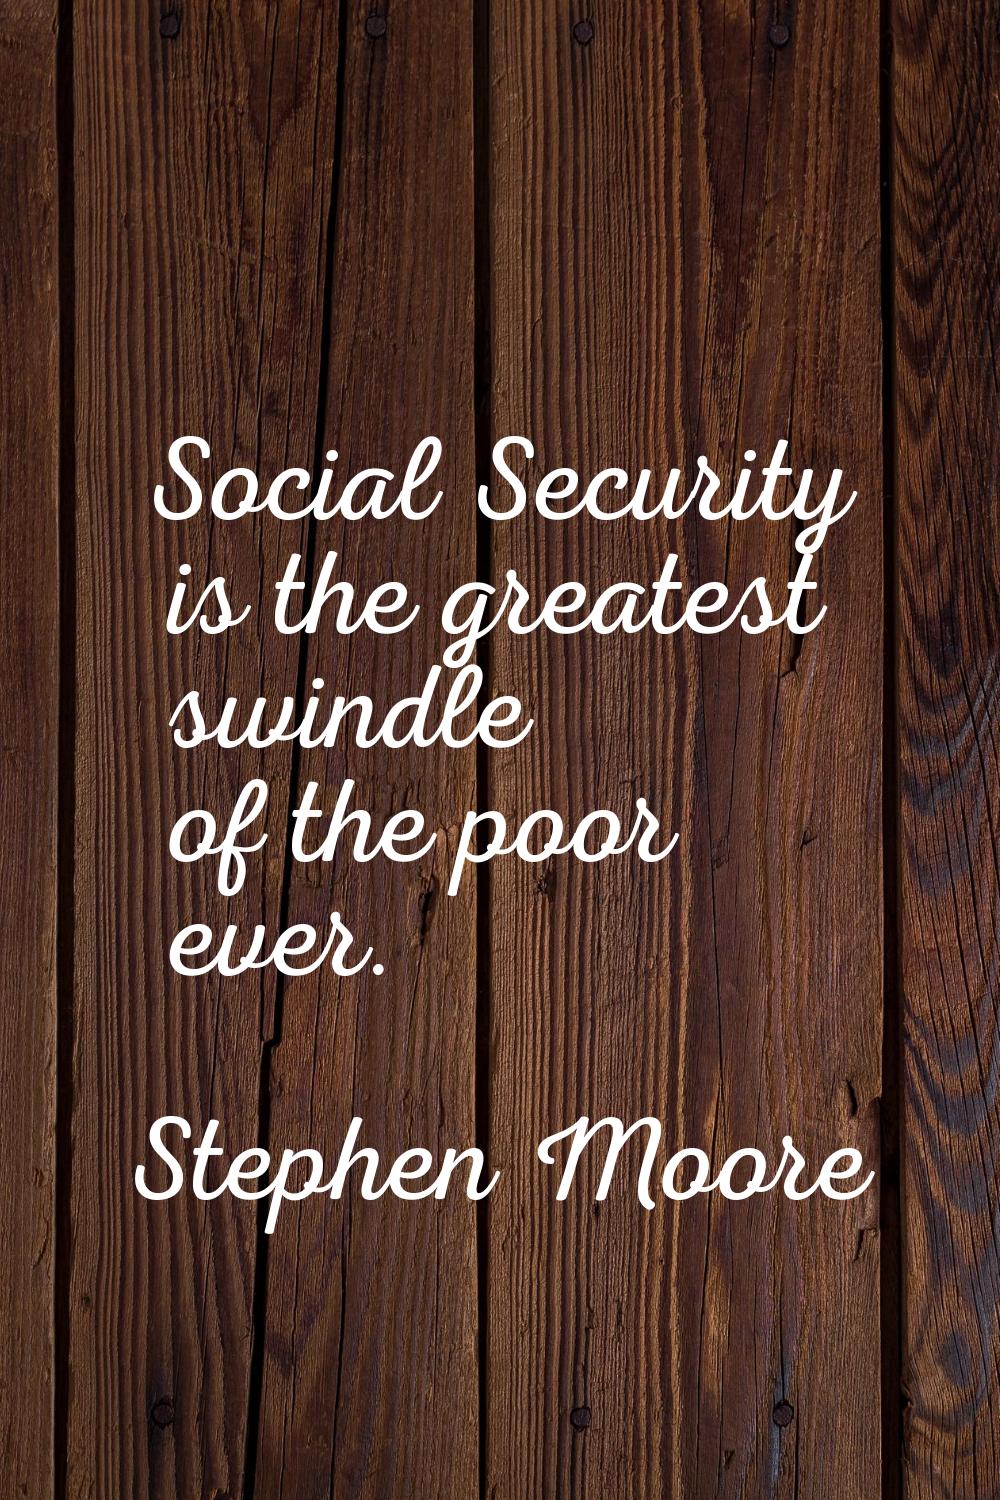 Social Security is the greatest swindle of the poor ever.